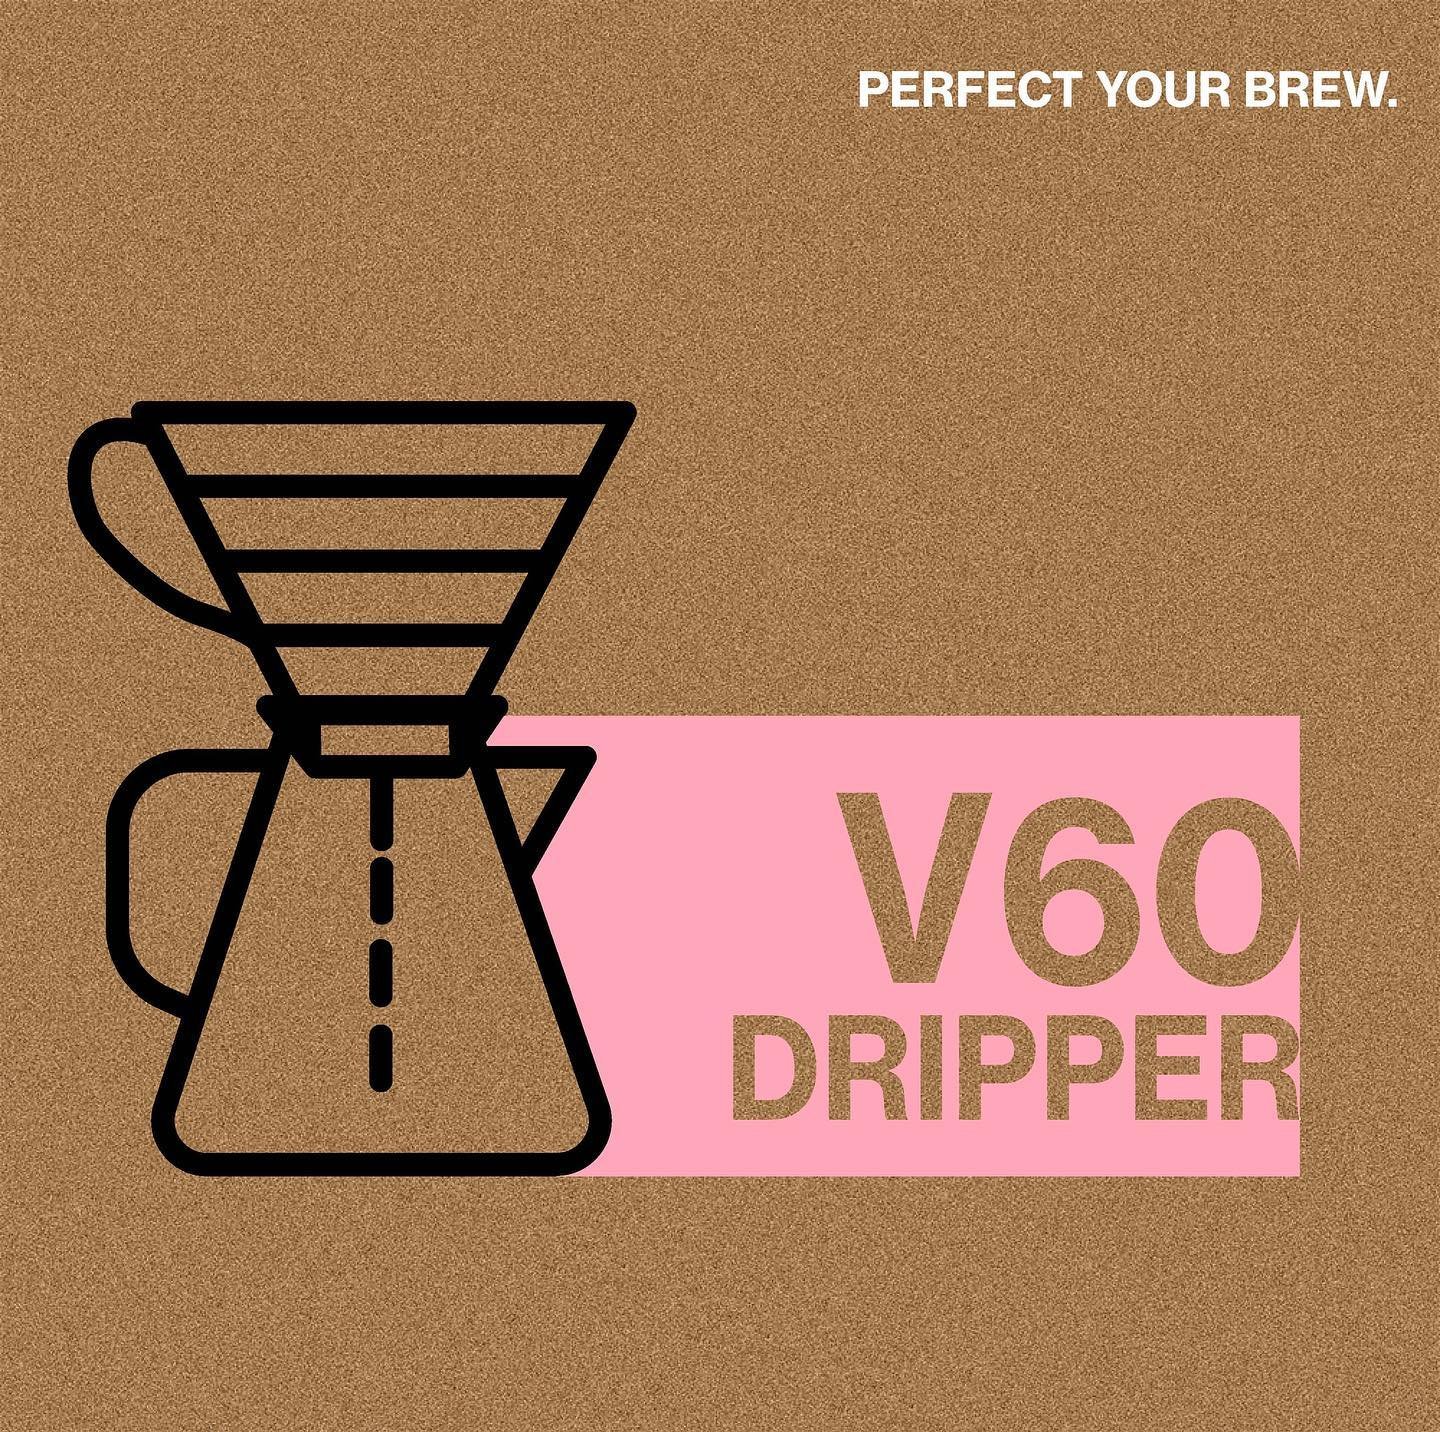 New blog post helping you master the art of brewing with a v60. And please, for the love of god&hellip;

&hellip;don&rsquo;t say &ldquo;you put the drip in drippers&rdquo; in the comments.

Www.DripCoffeeCatering.com/blog for more